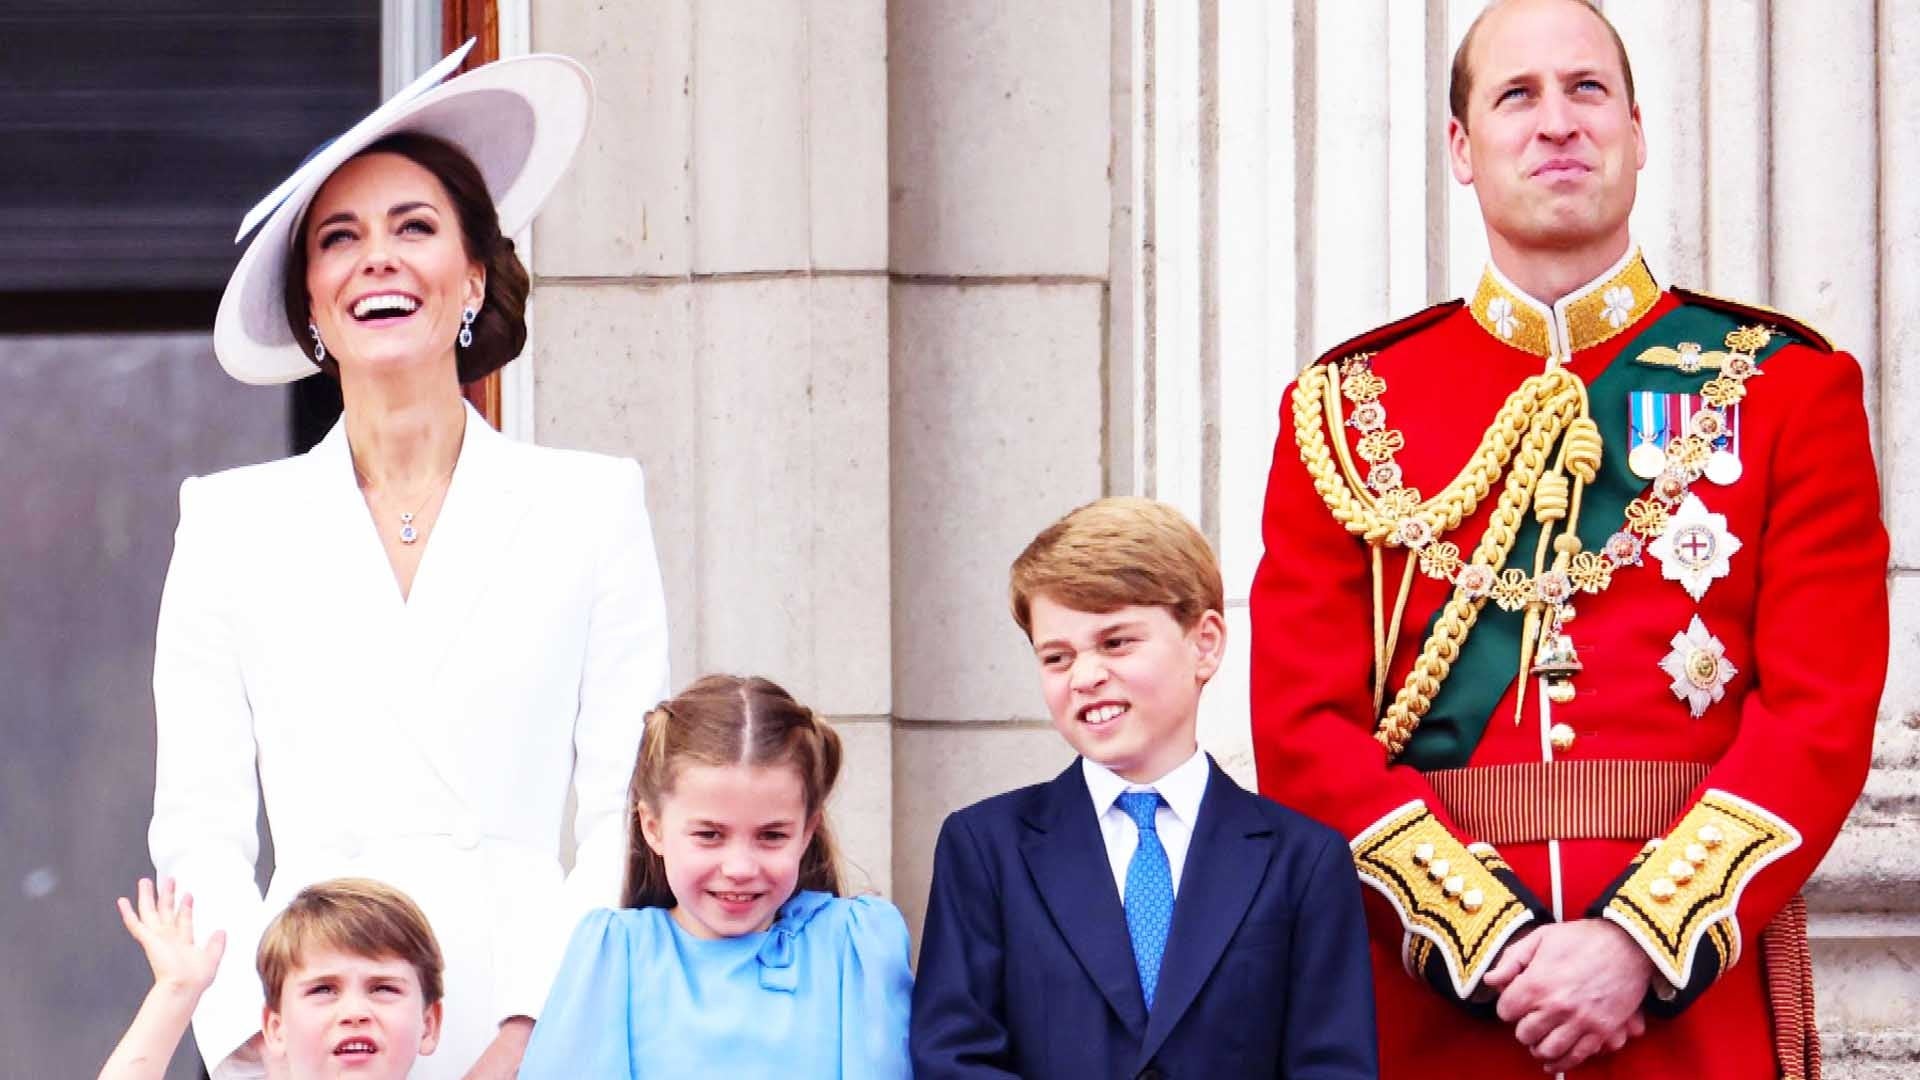 Prince William and Kate Middleton Want ‘Normal Childhood’ for Kids as They Start School